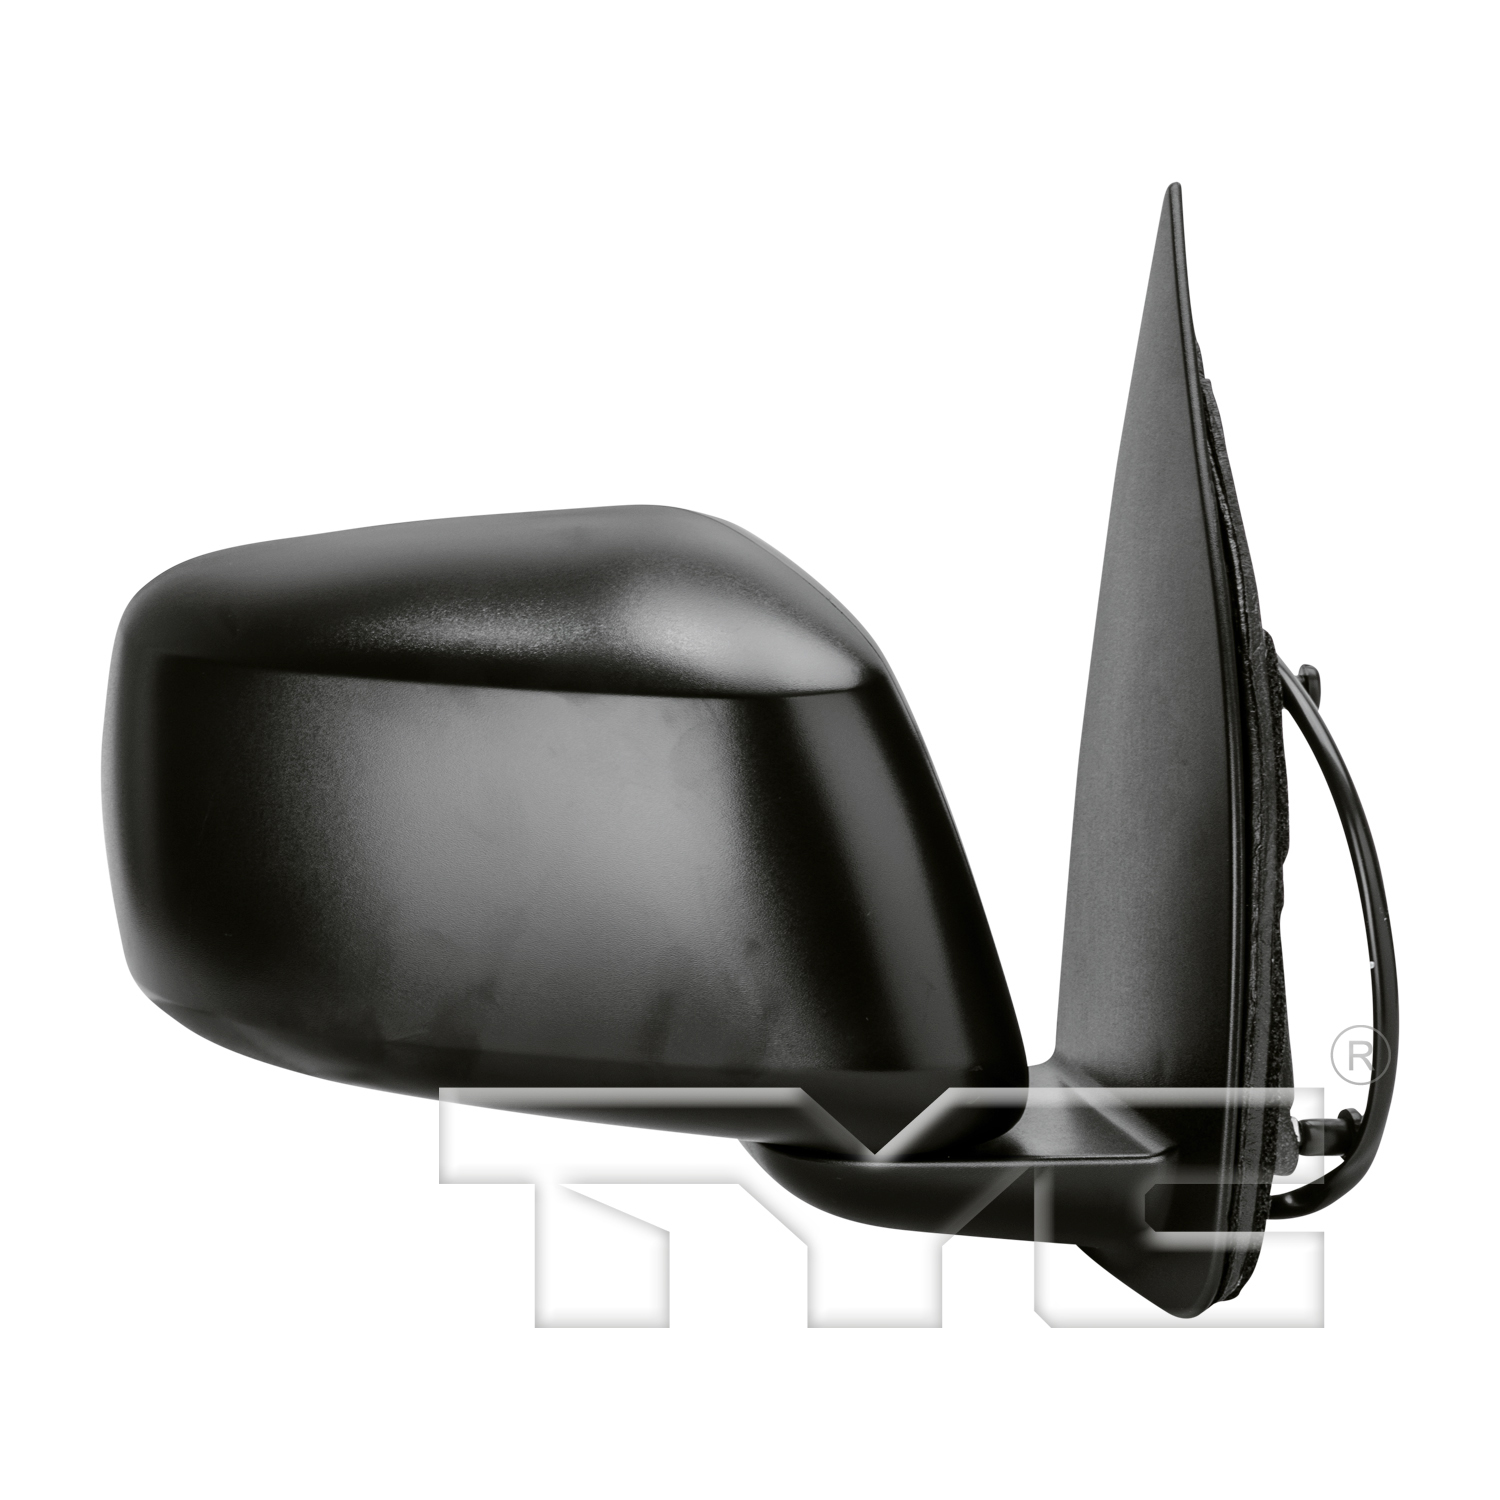 Aftermarket MIRRORS for NISSAN - XTERRA, XTERRA,05-15,RT Mirror outside rear view